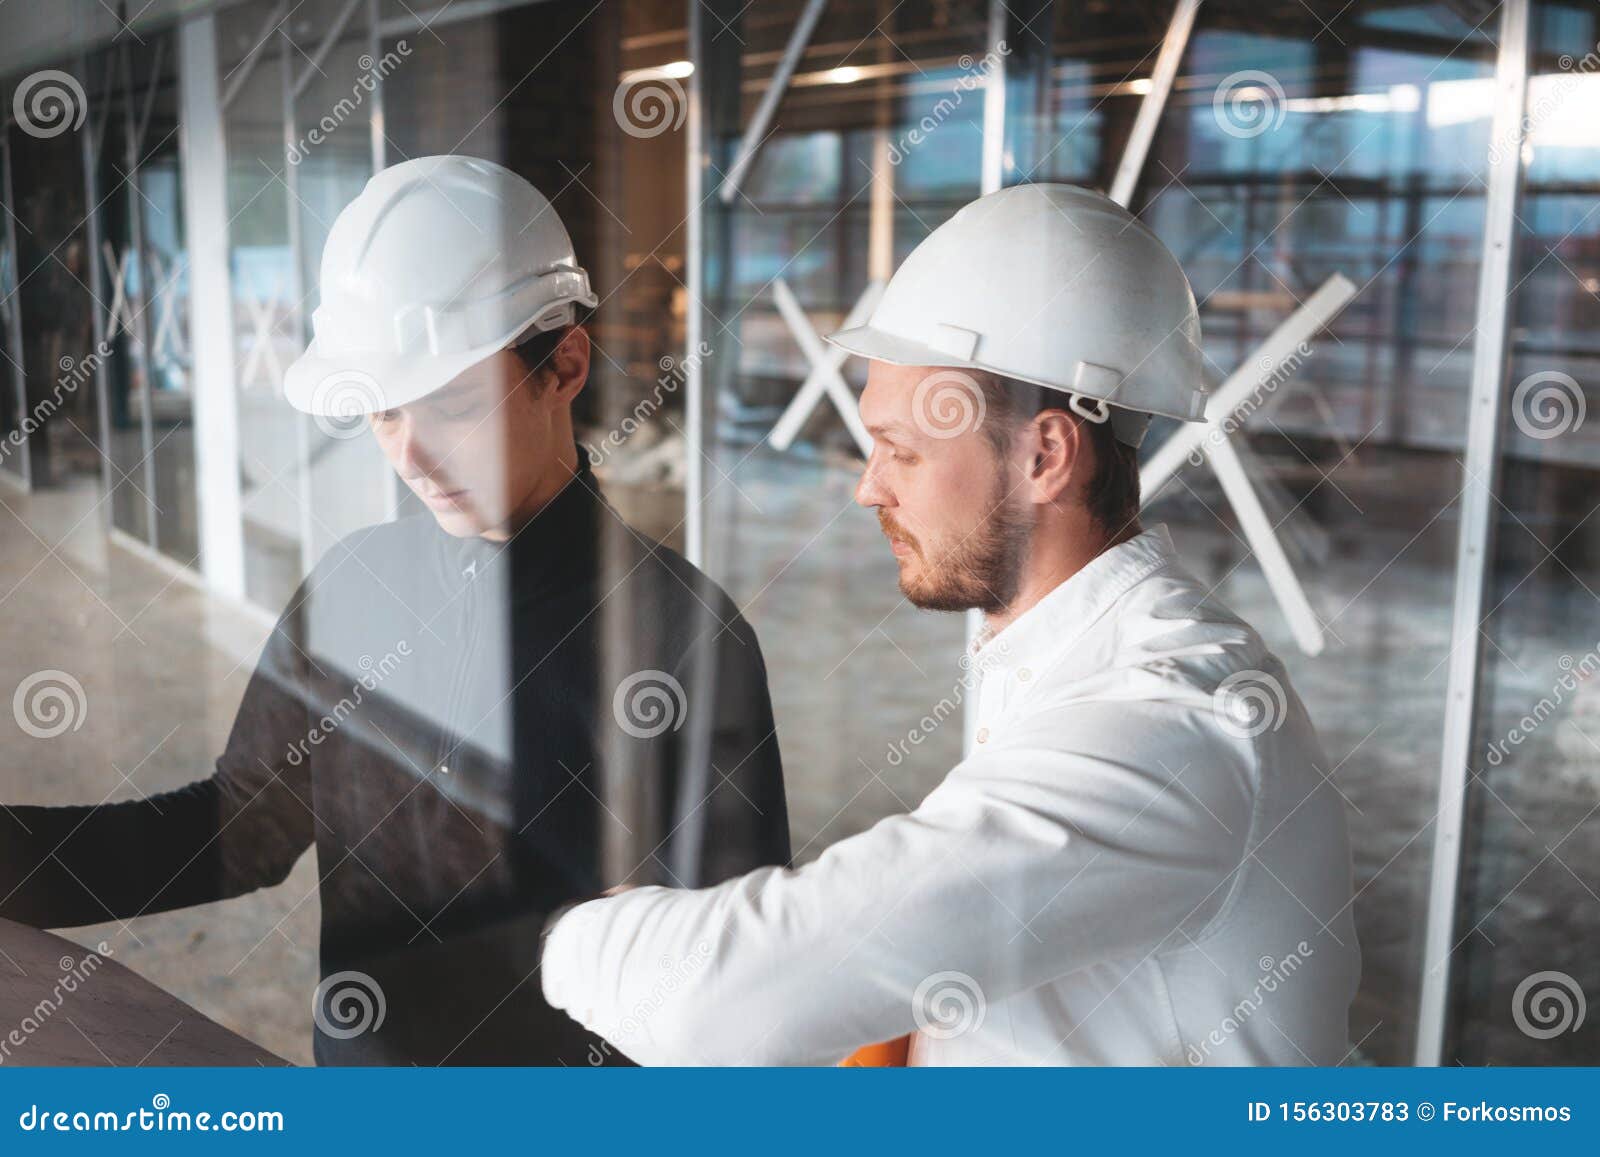 architect and builder lookin on blueprint building under construction